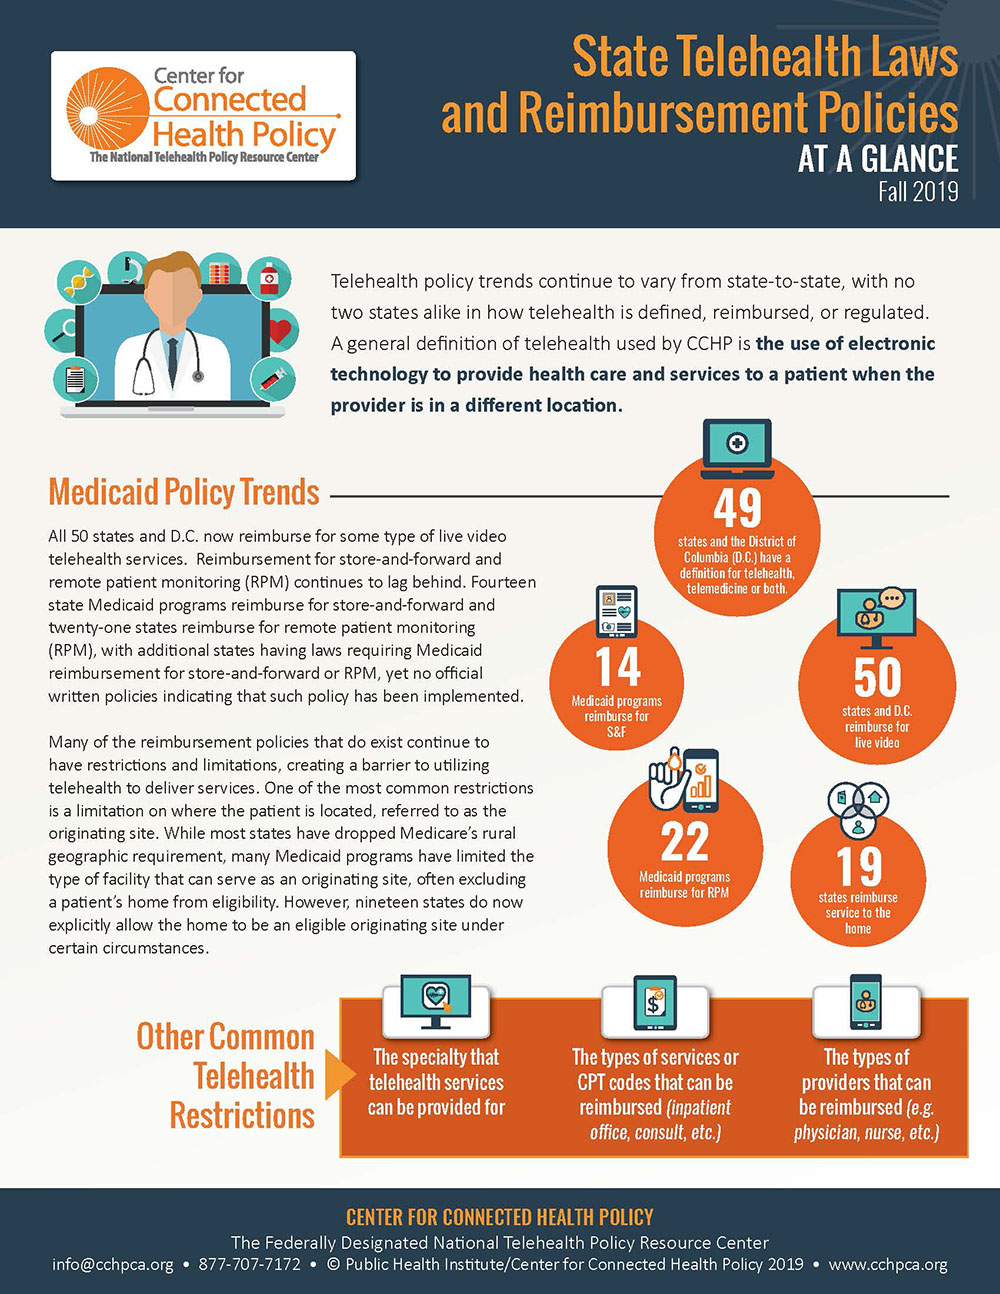 Center for Connected Health Policy State Telehealth Laws and Reimbursement Policies flyer page 1